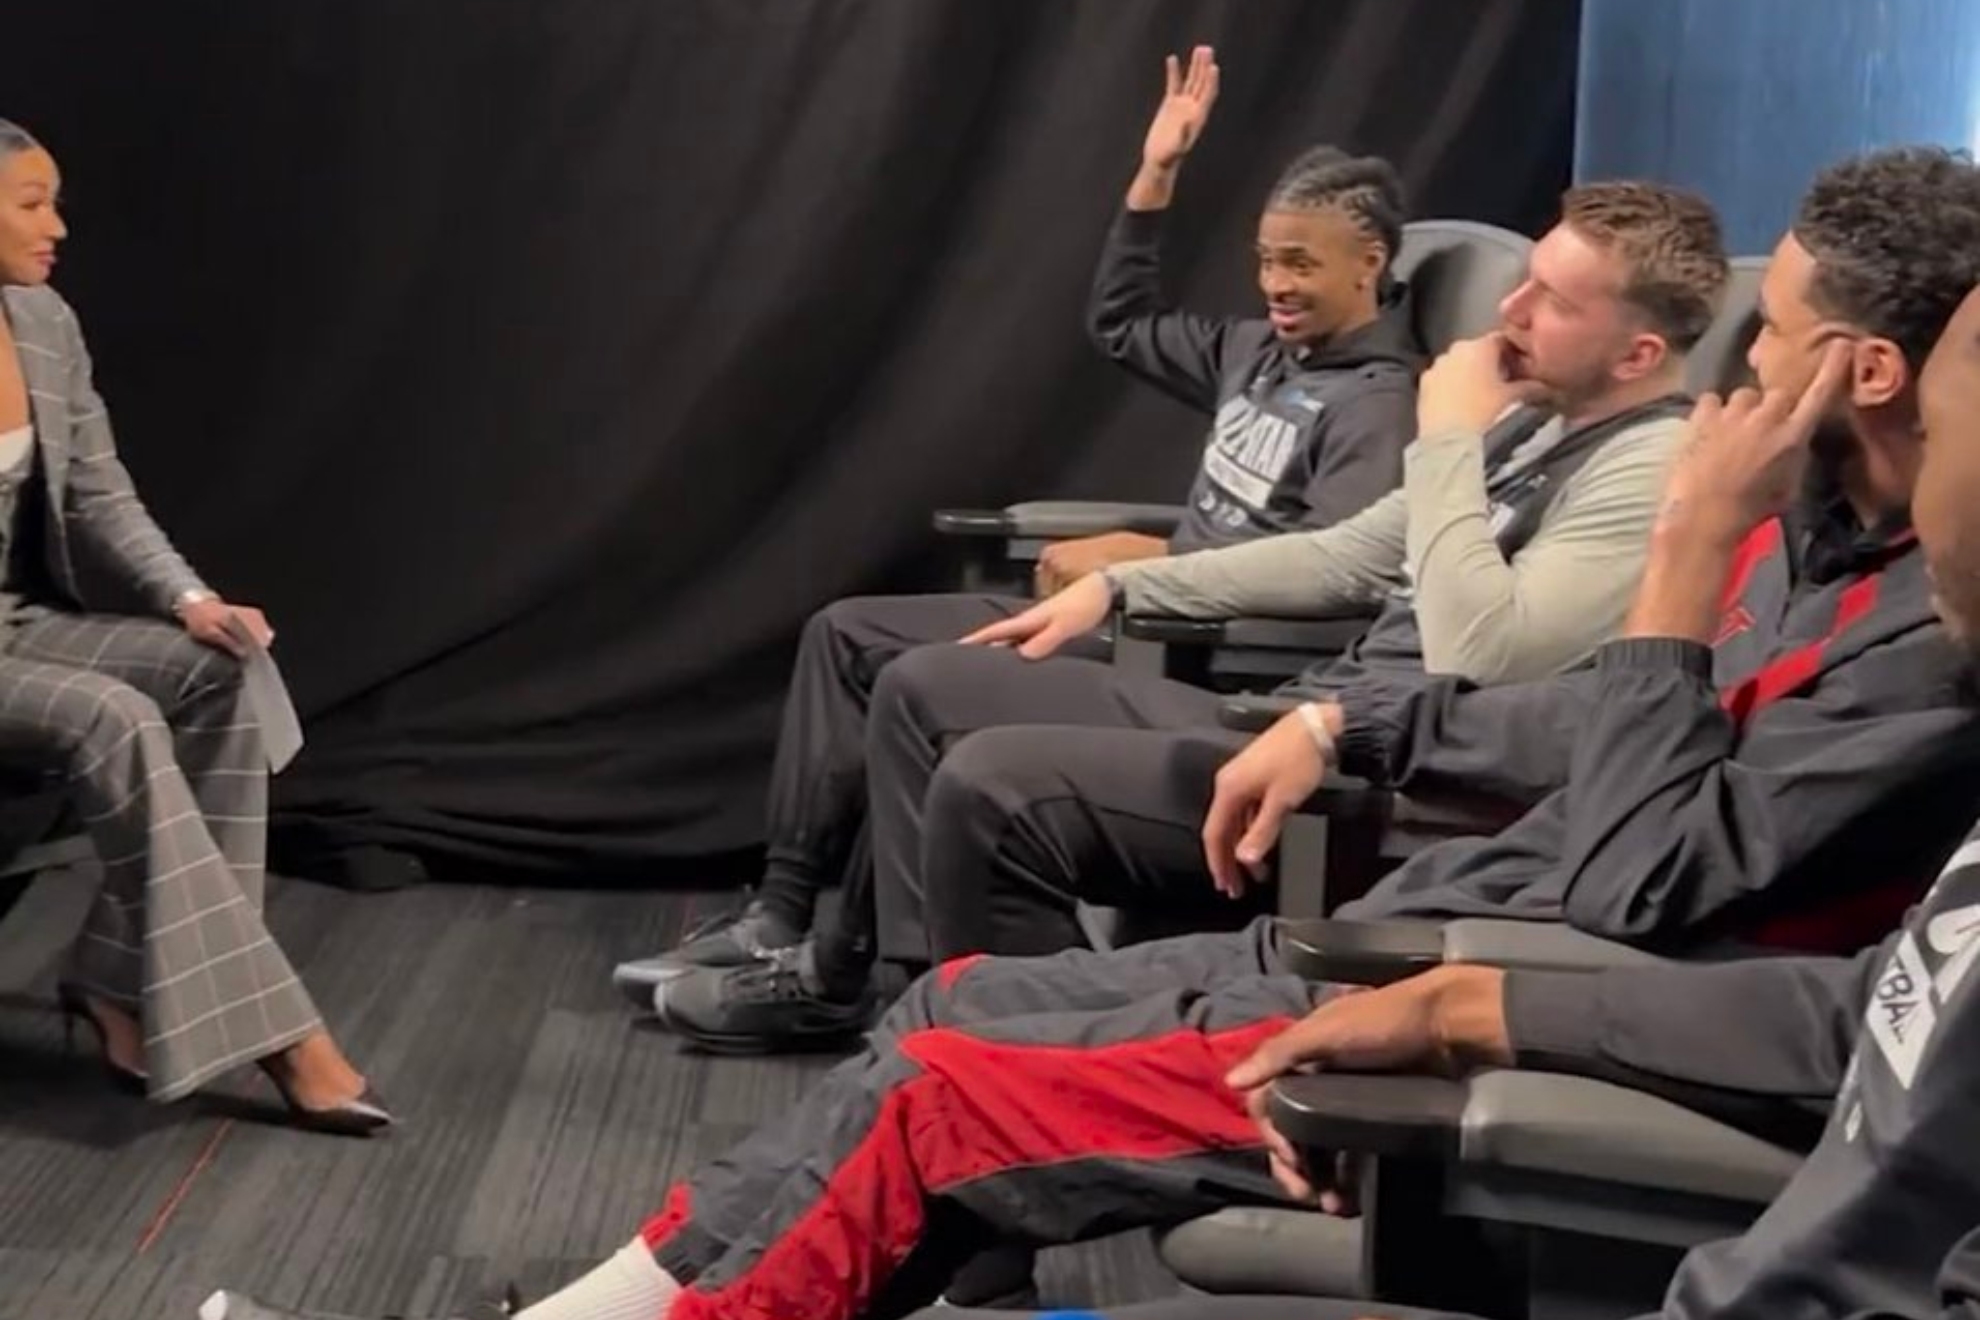 Ja Morant, Luka Doncic, Jayson Tatum and Donovan Mitchell in an interview with Malika Andrews.